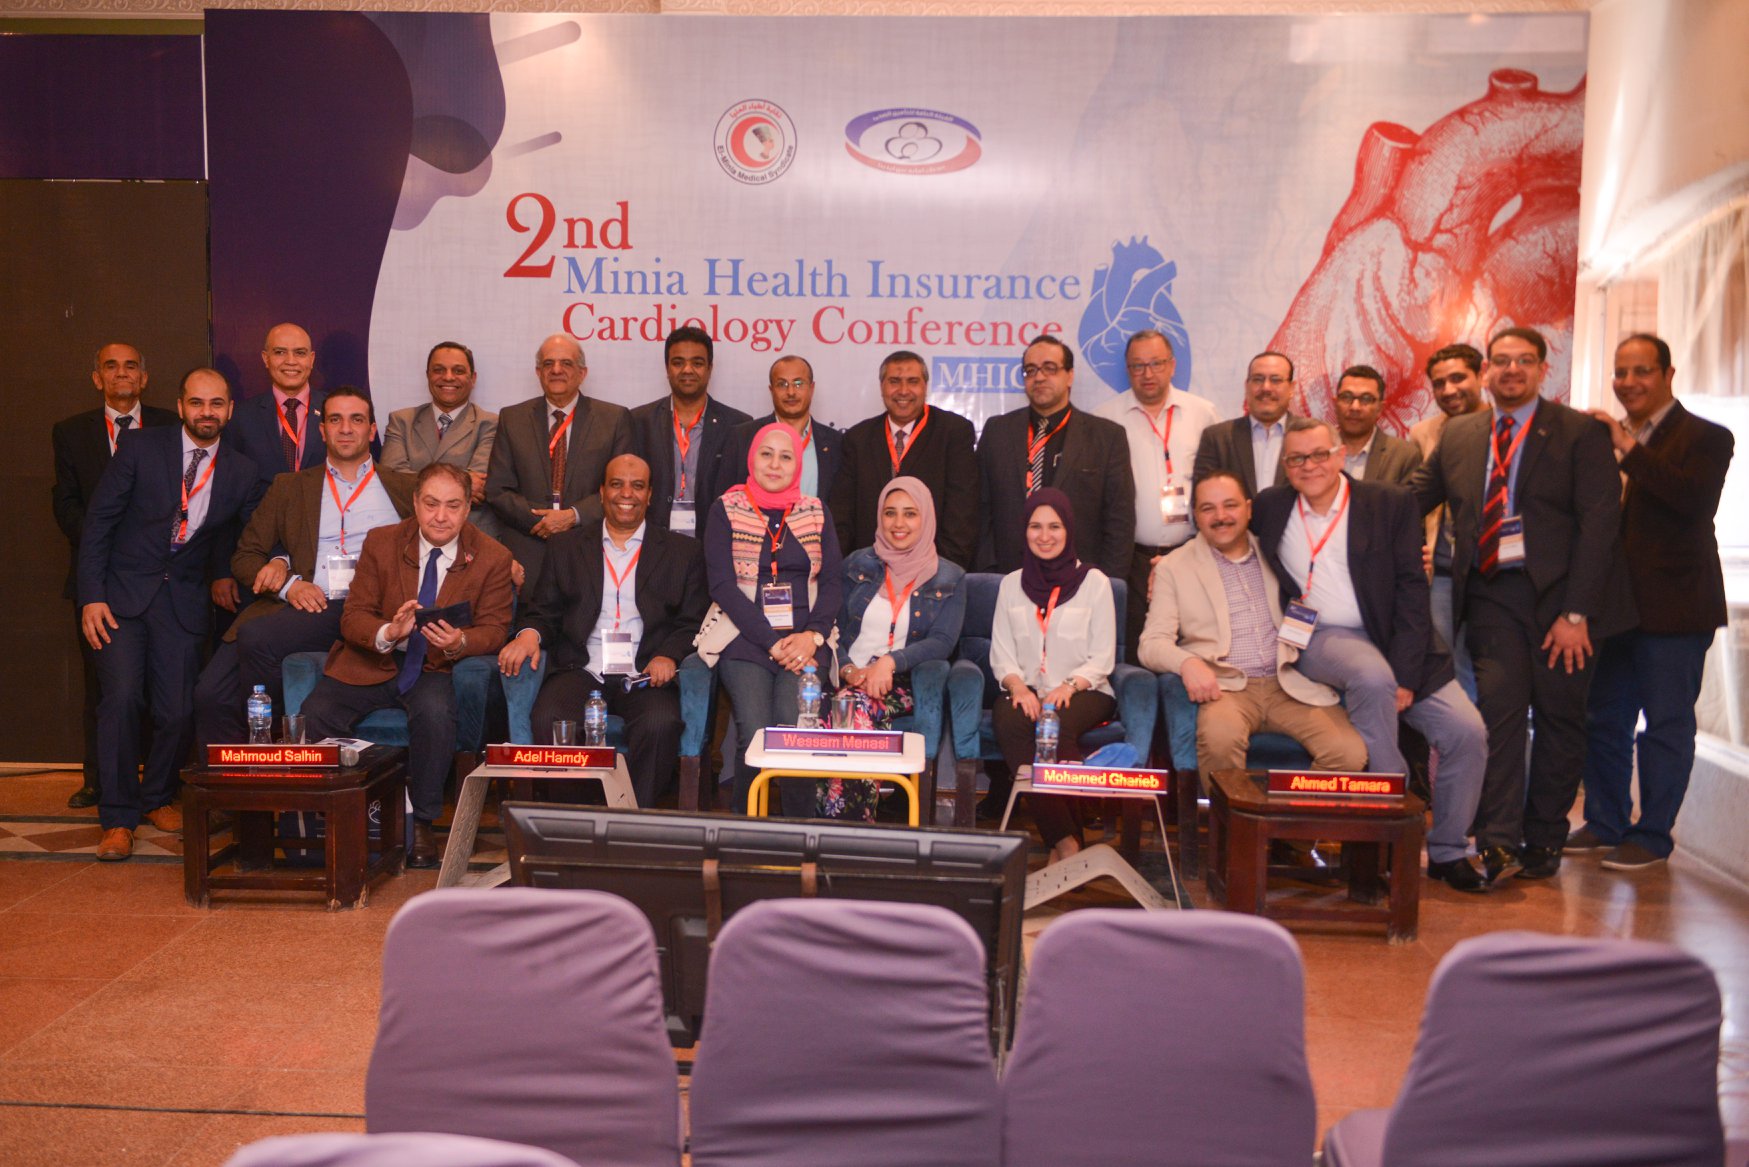 2nd Minia Health Insurance Cardiology Conference